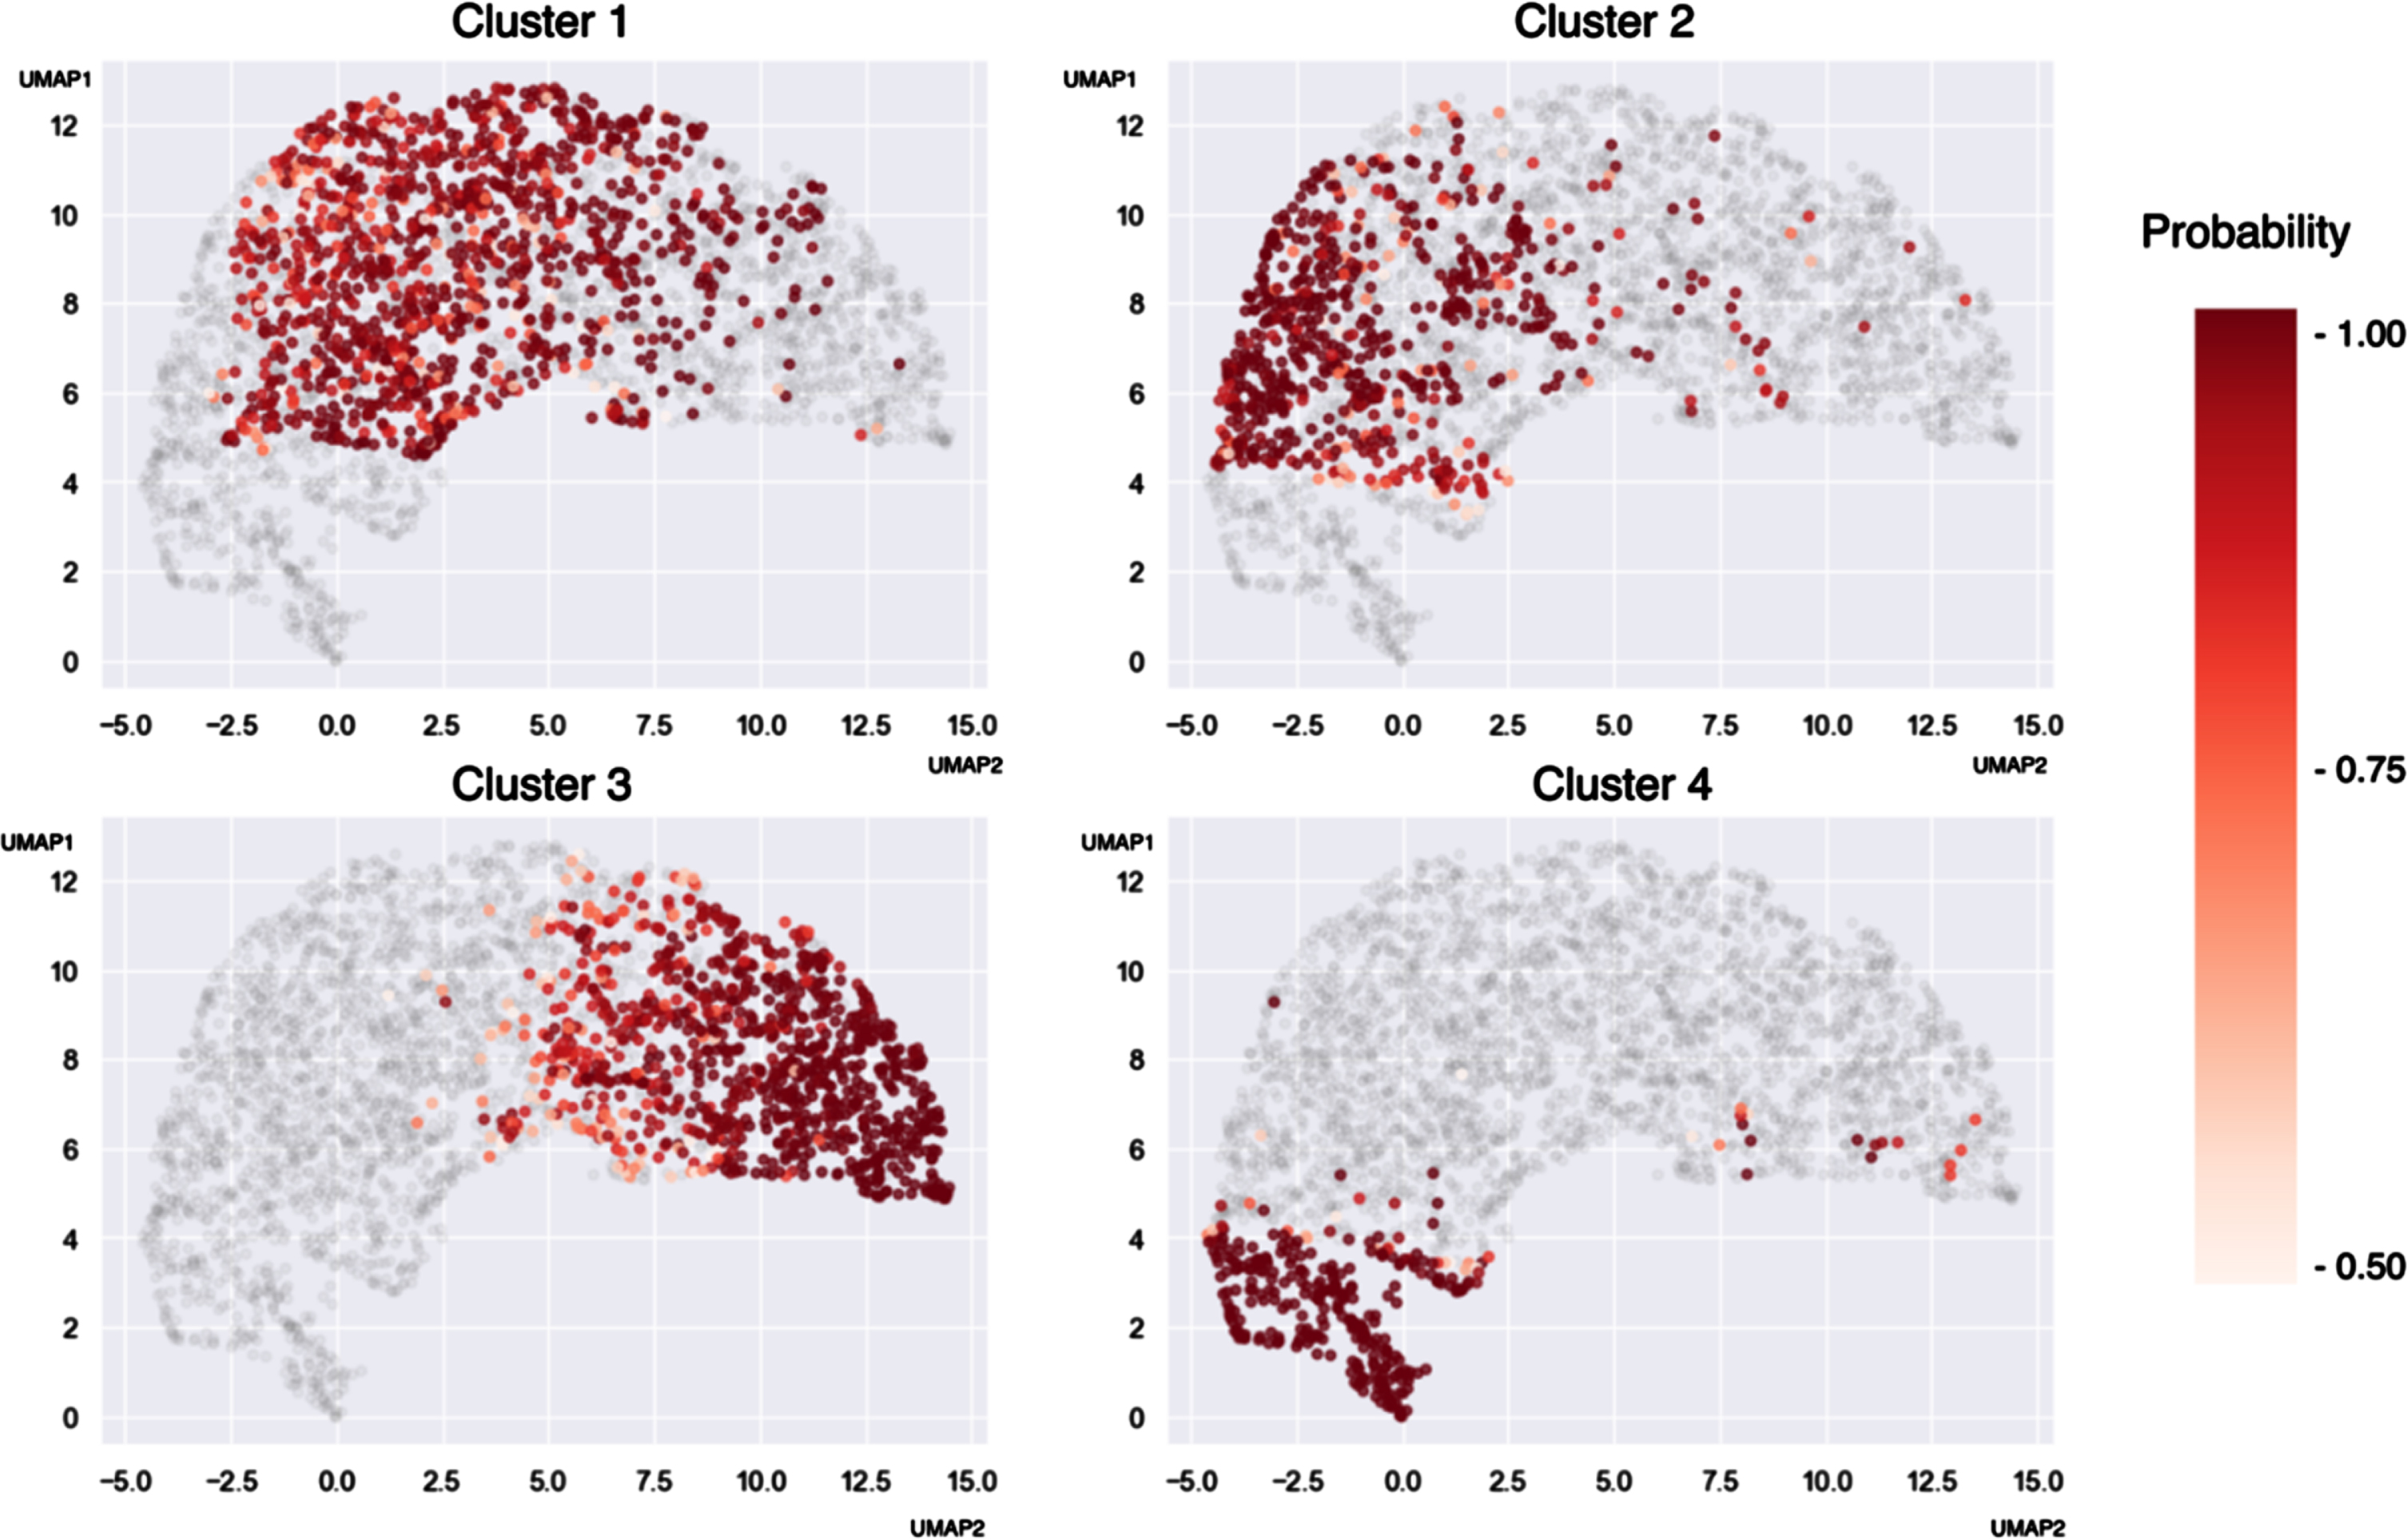 UMAP [39] bidimensional projection of the variables used to perform the clustering. The intensity represents the probability of cluster membership given by the GMM.